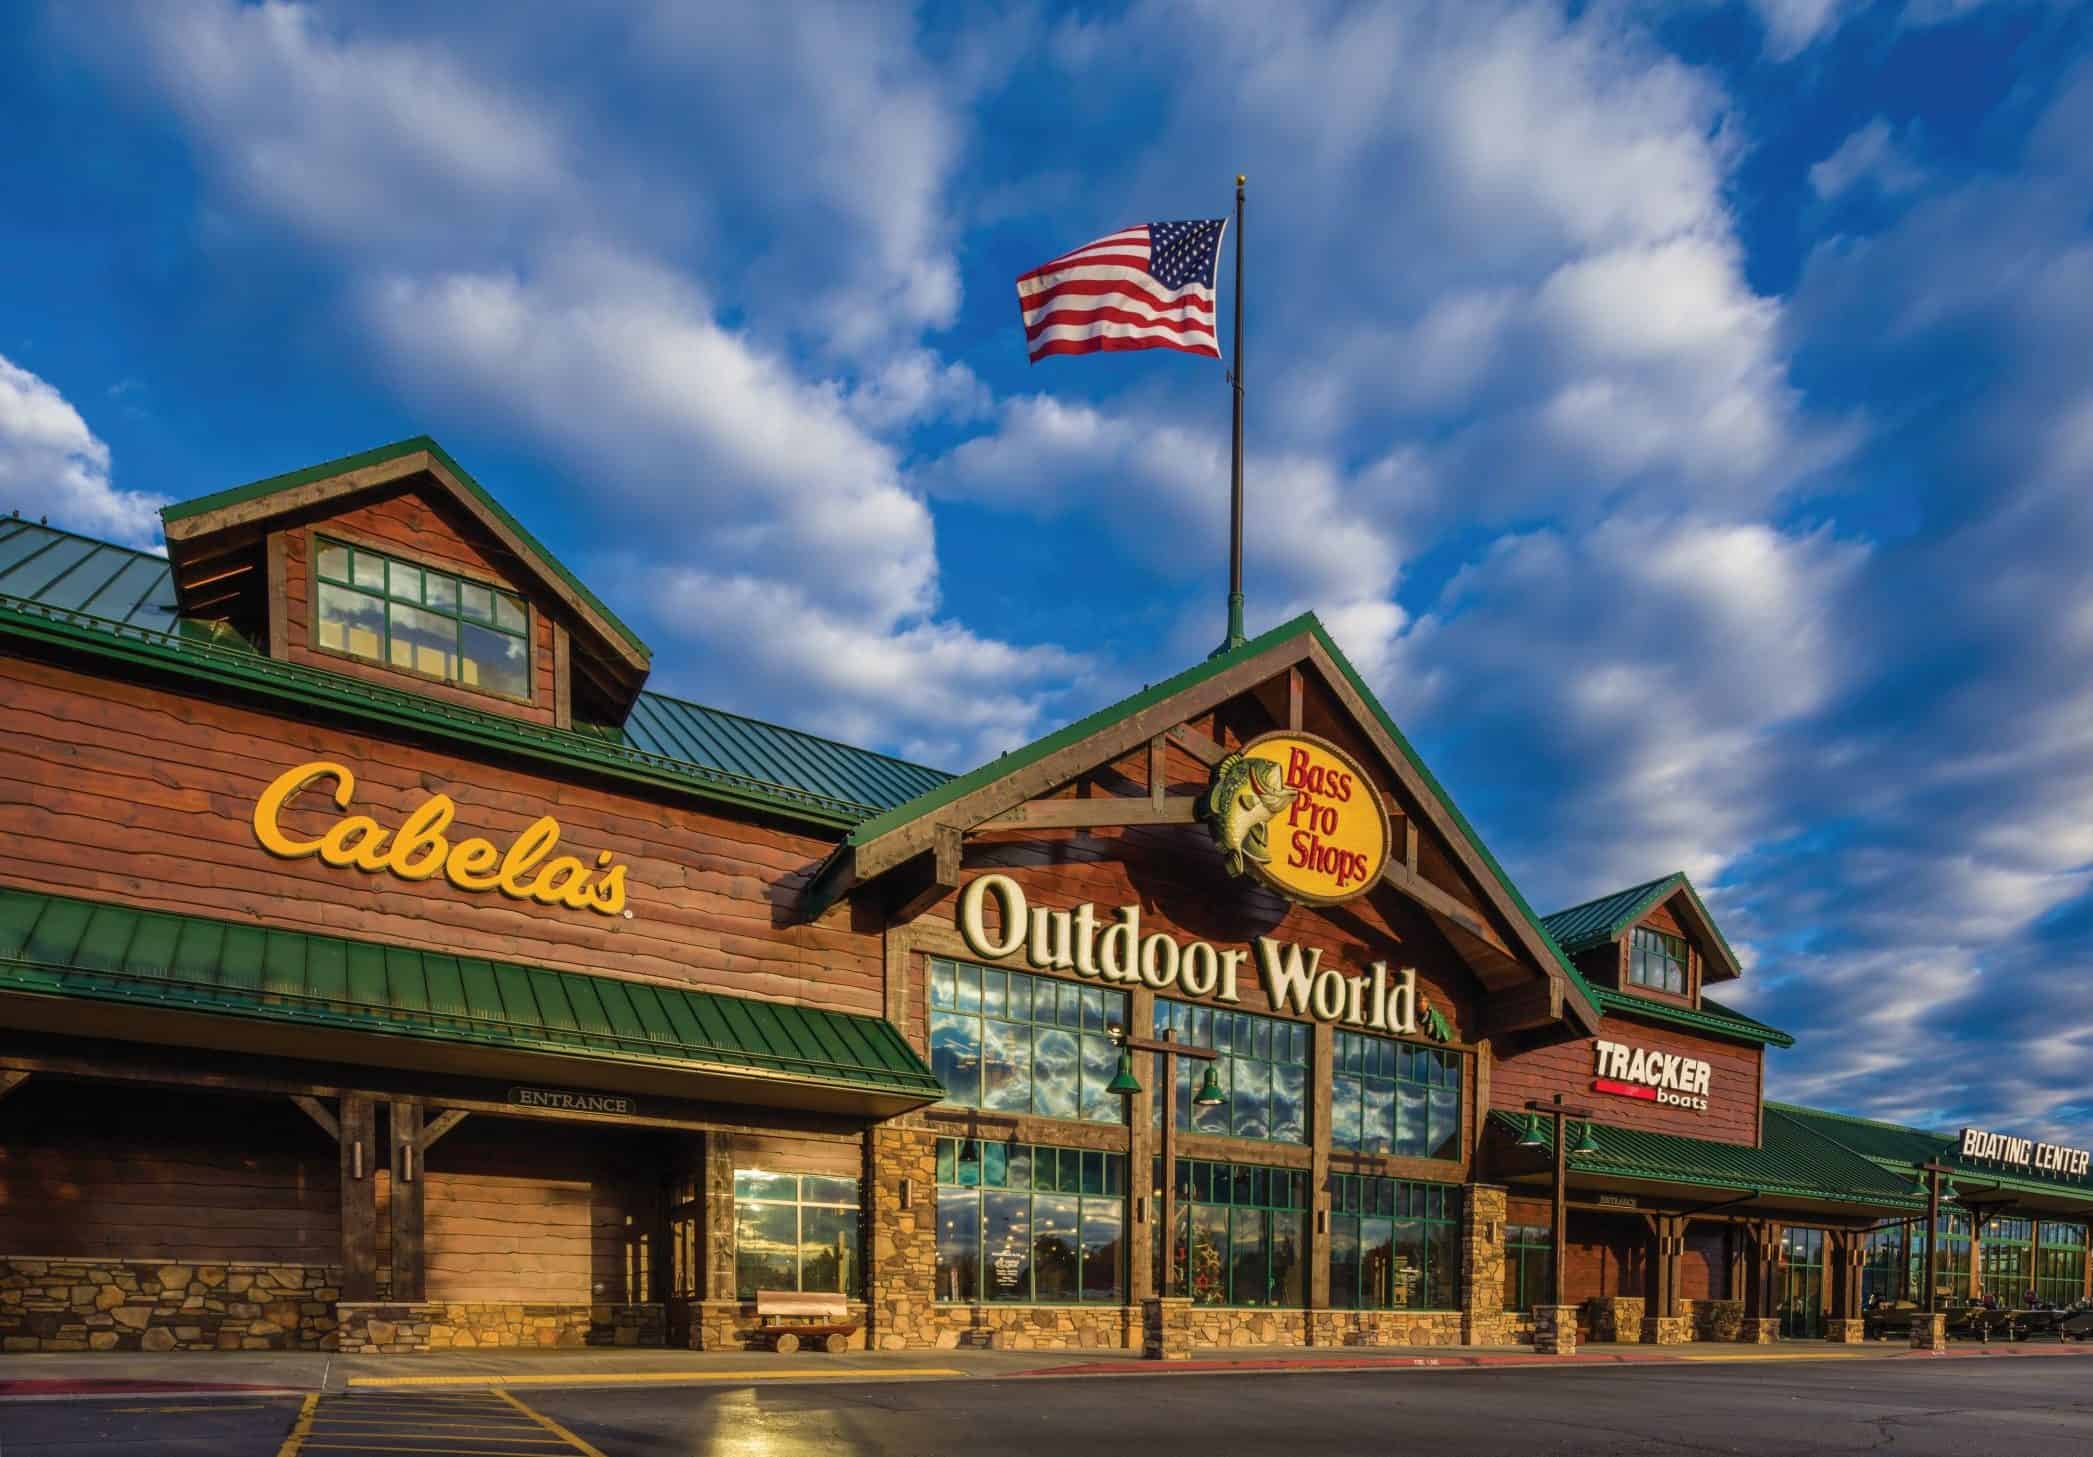 Newsweek honors Bass Pro Shops and Cabela's with “America's Best